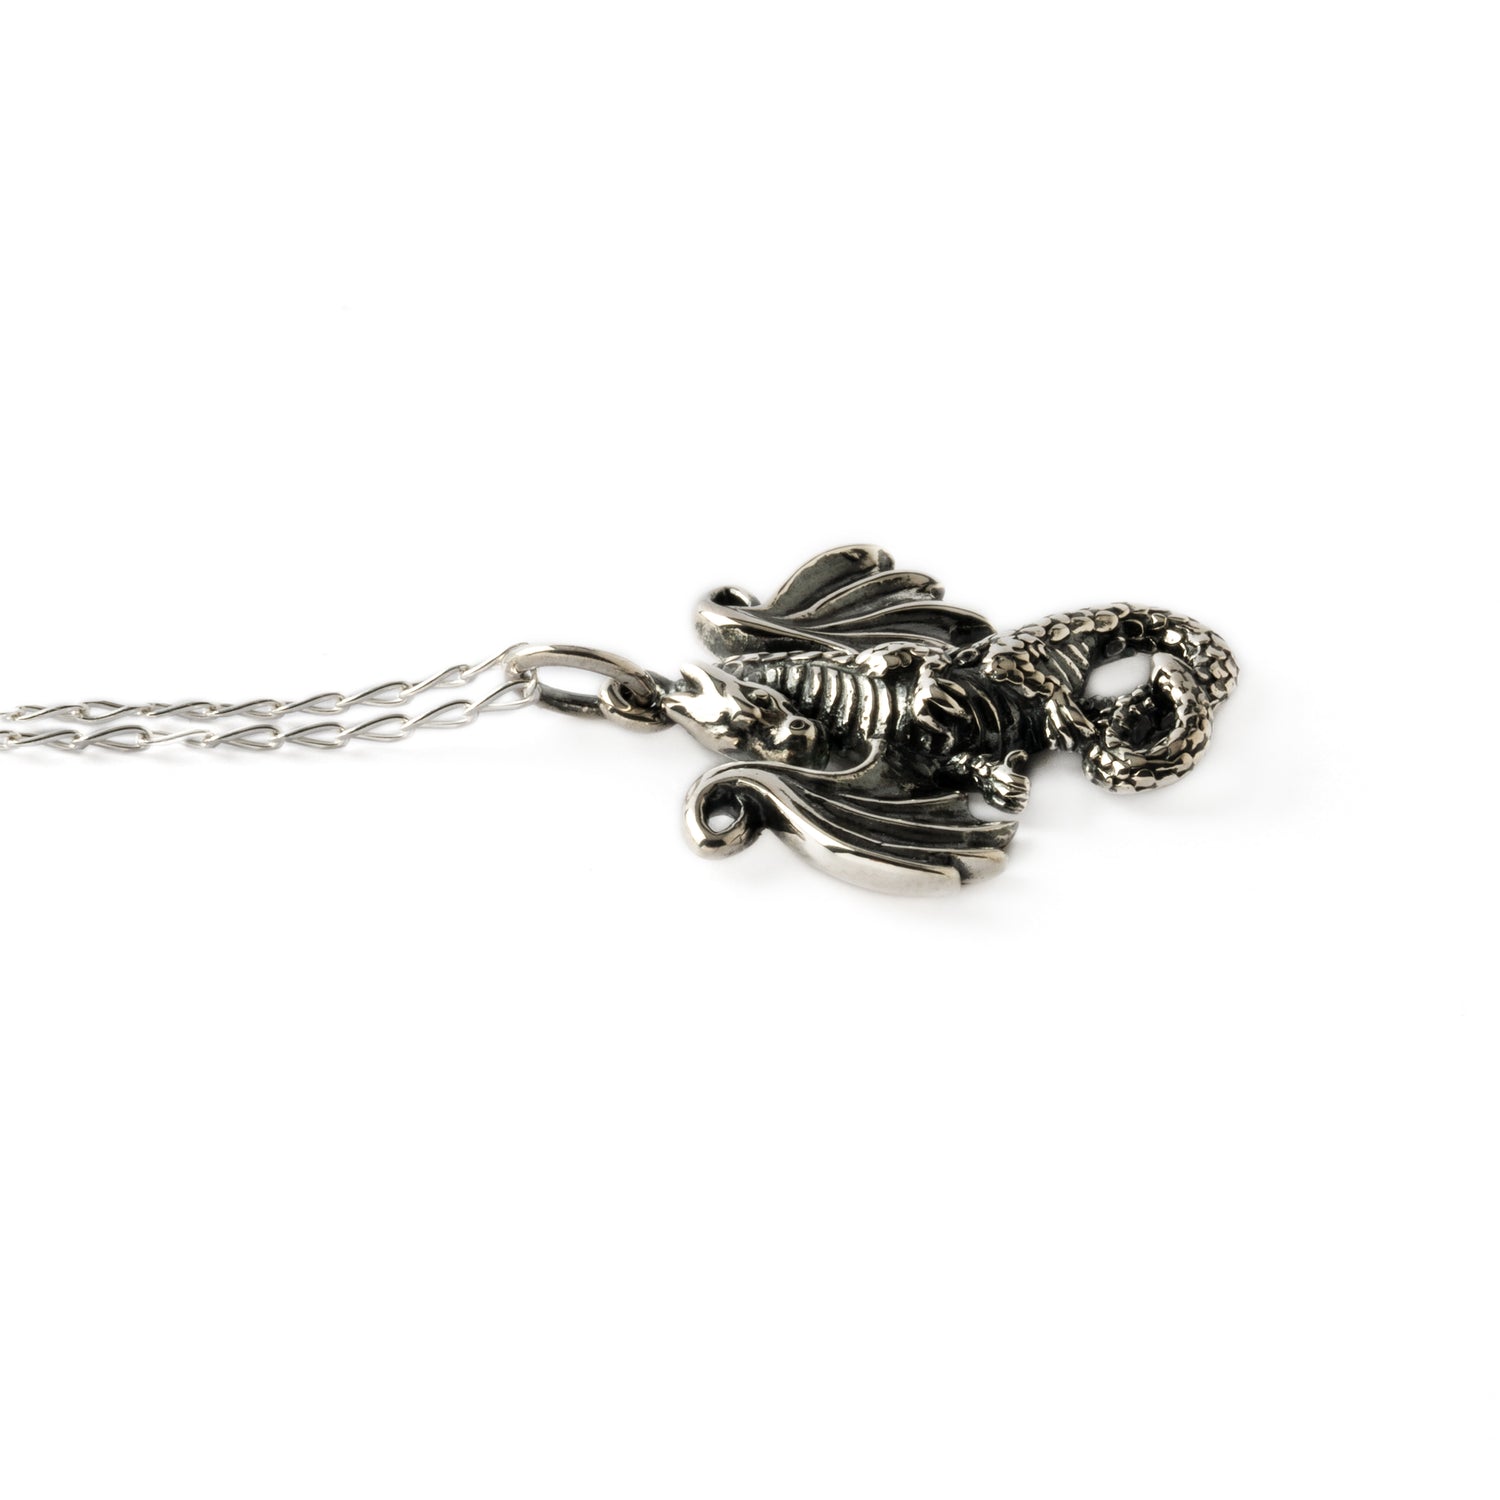 Dragon tale silver charm necklace side view